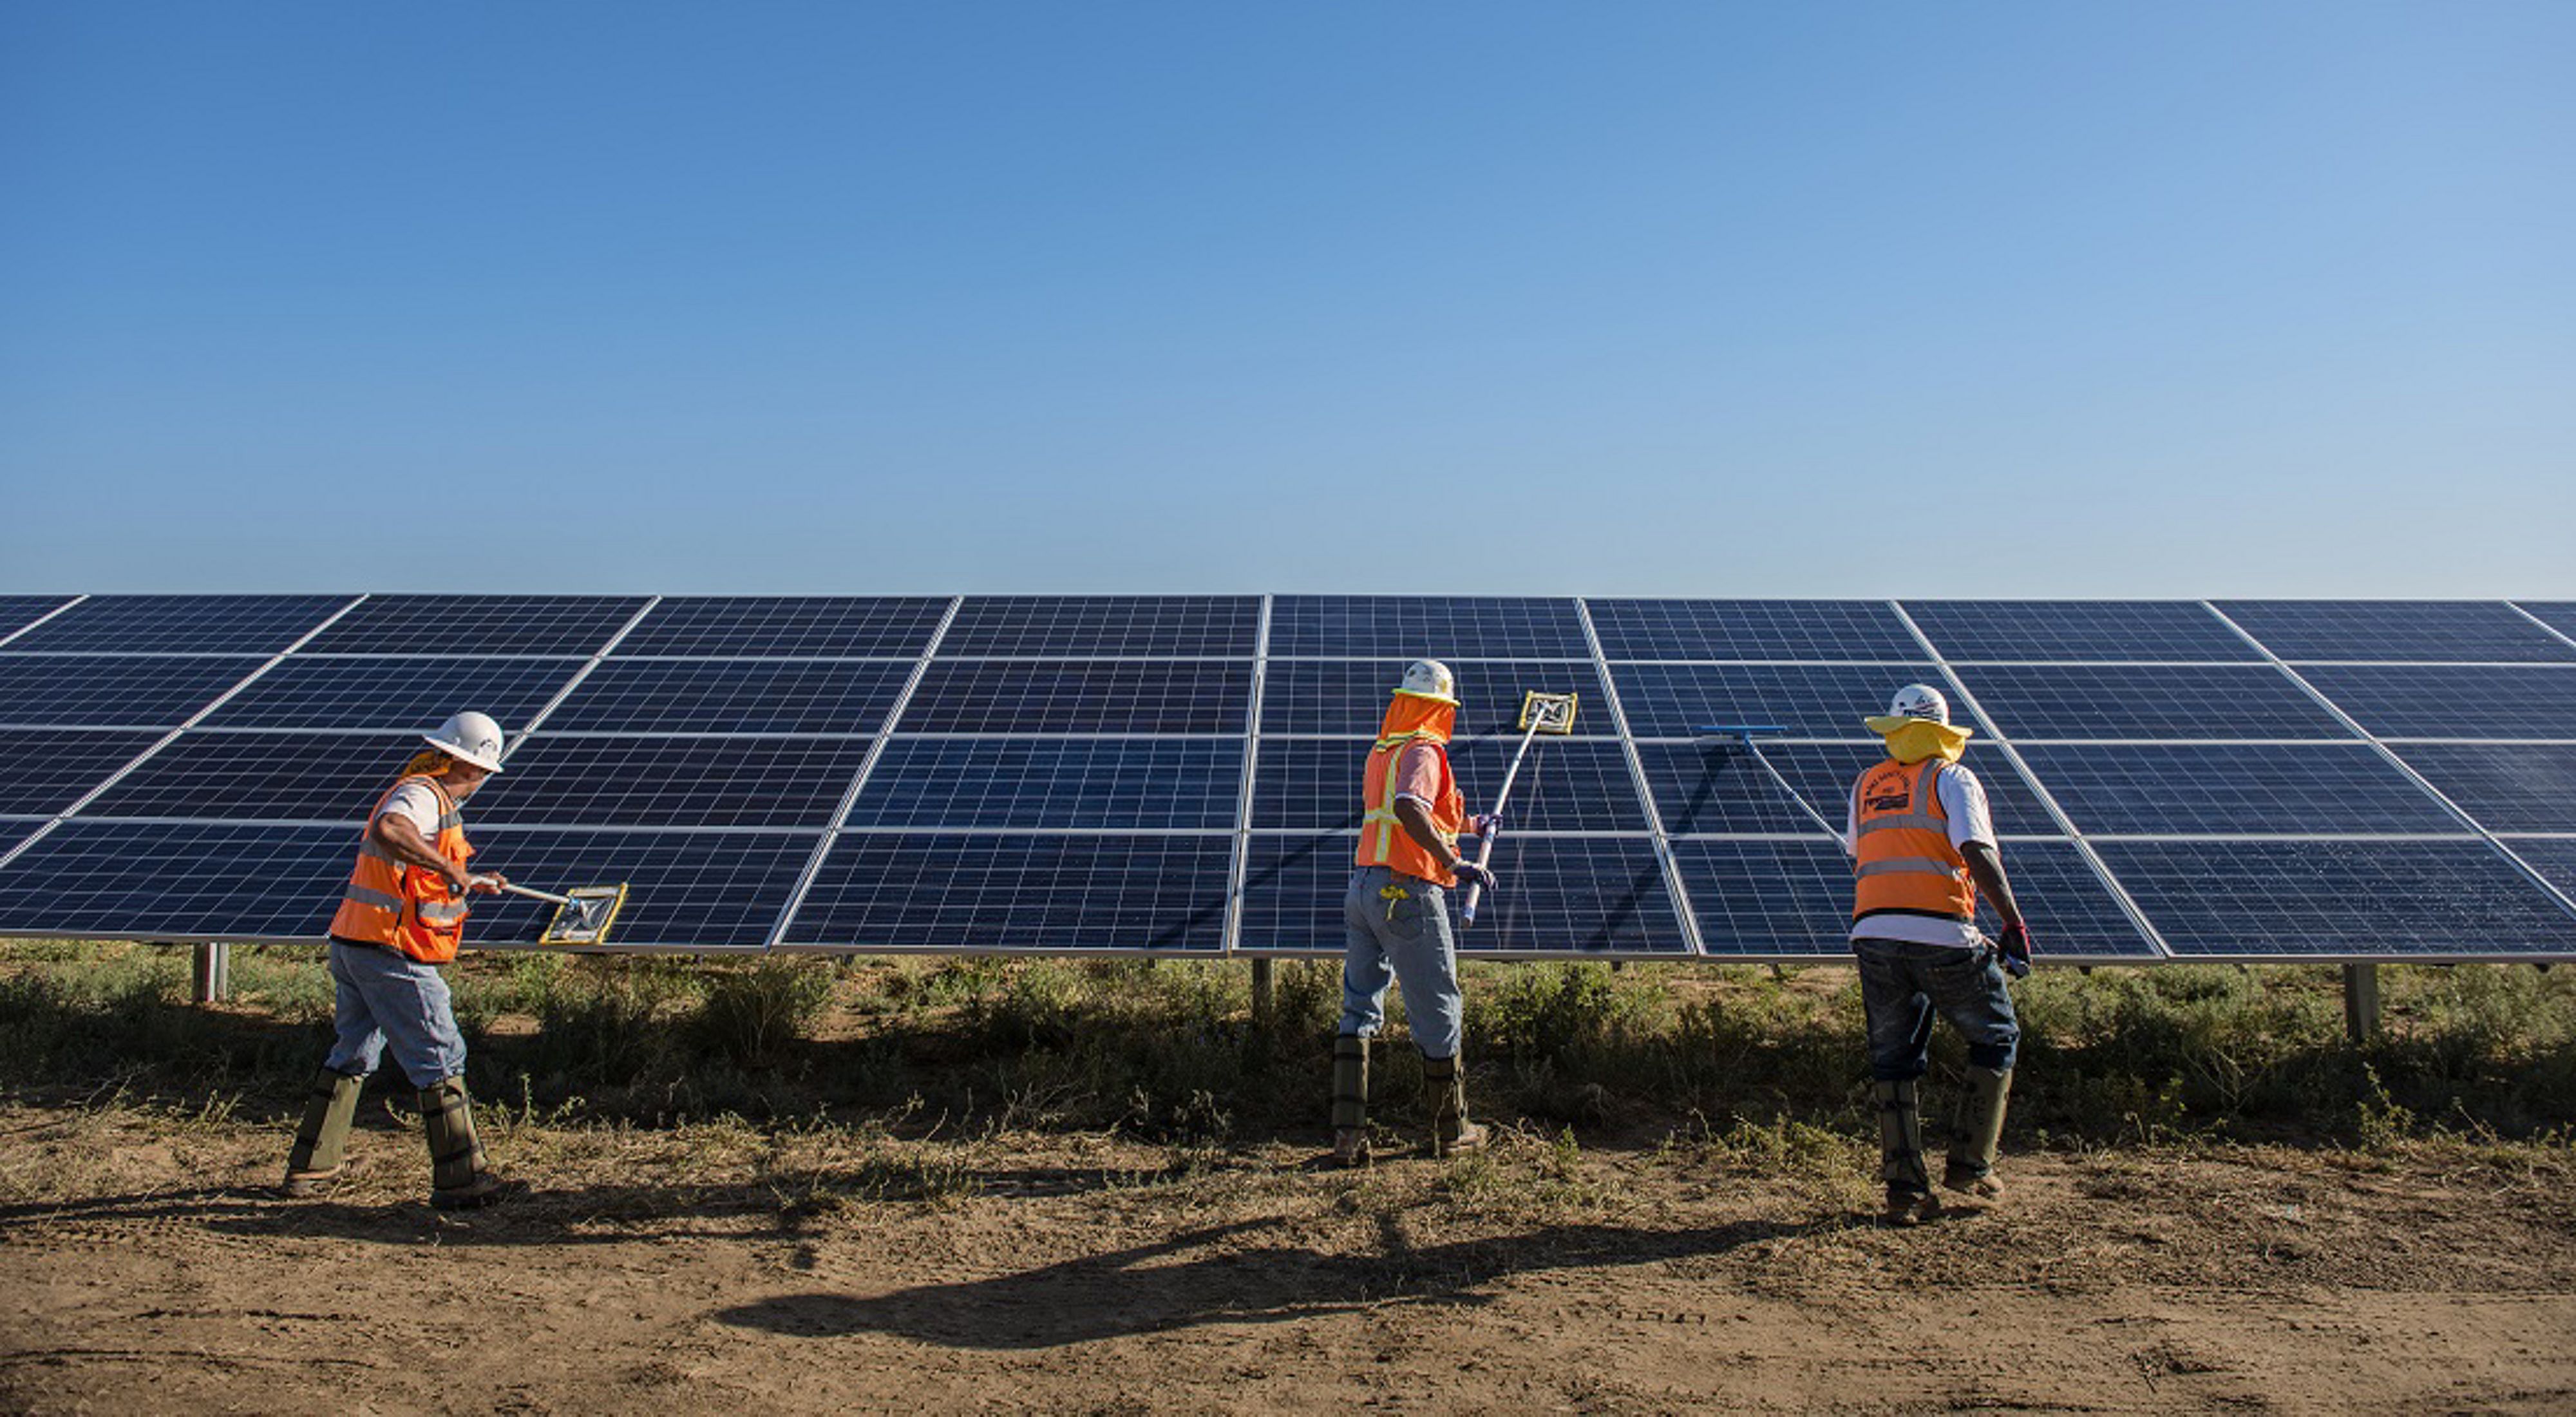 Three workers in hard hats cleaning solar panels